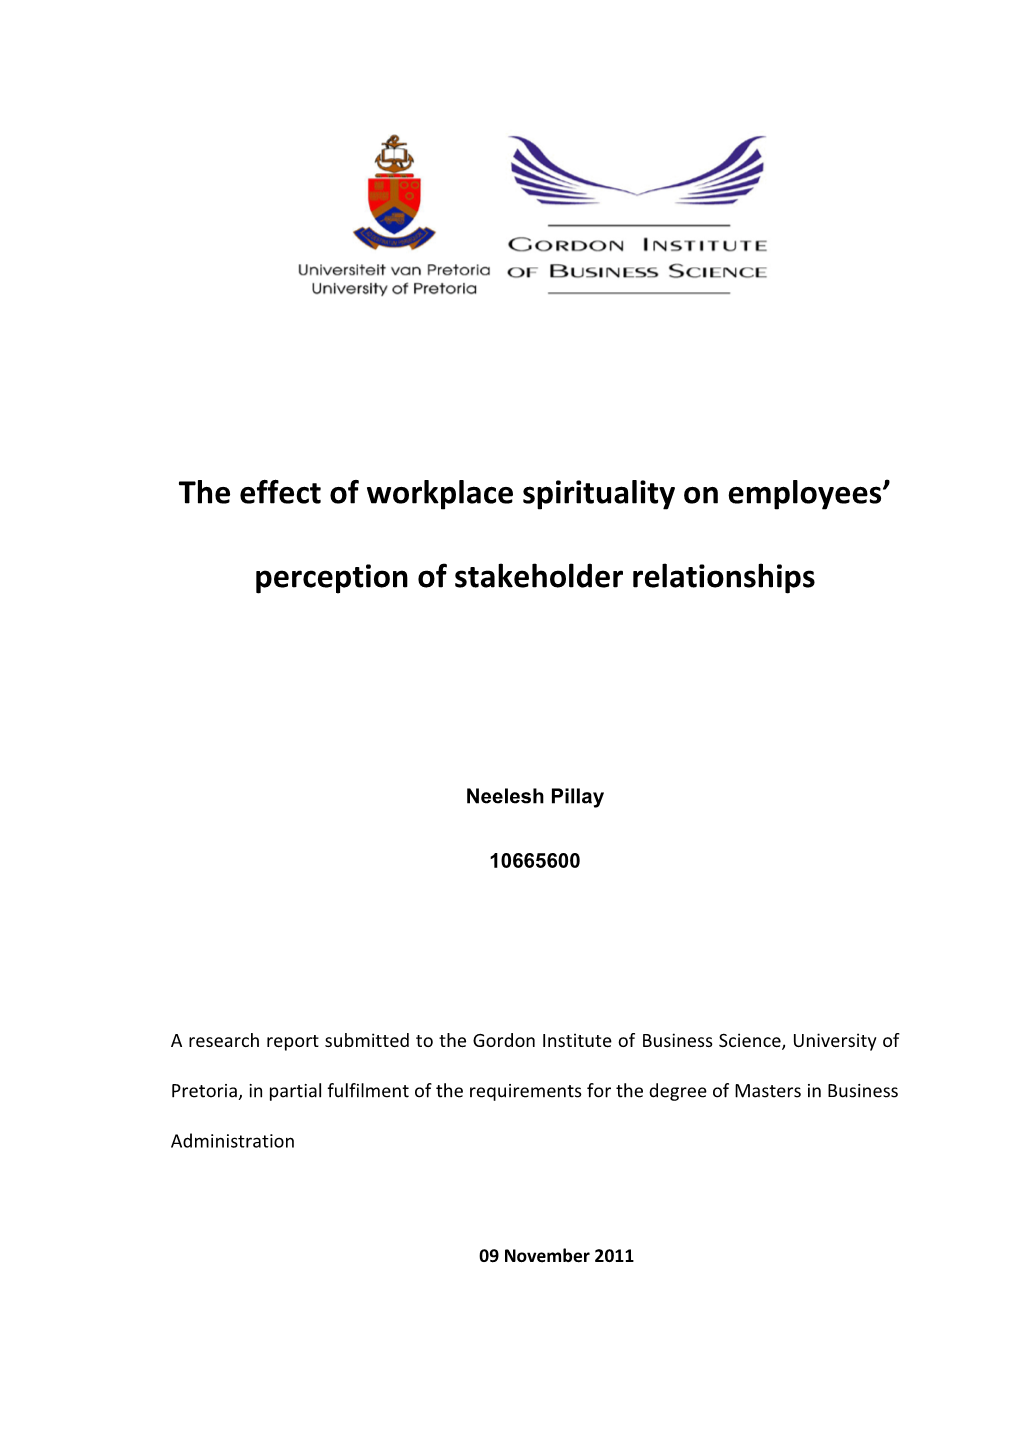 The Effect of Workplace Spirituality on Employees' Perception Of